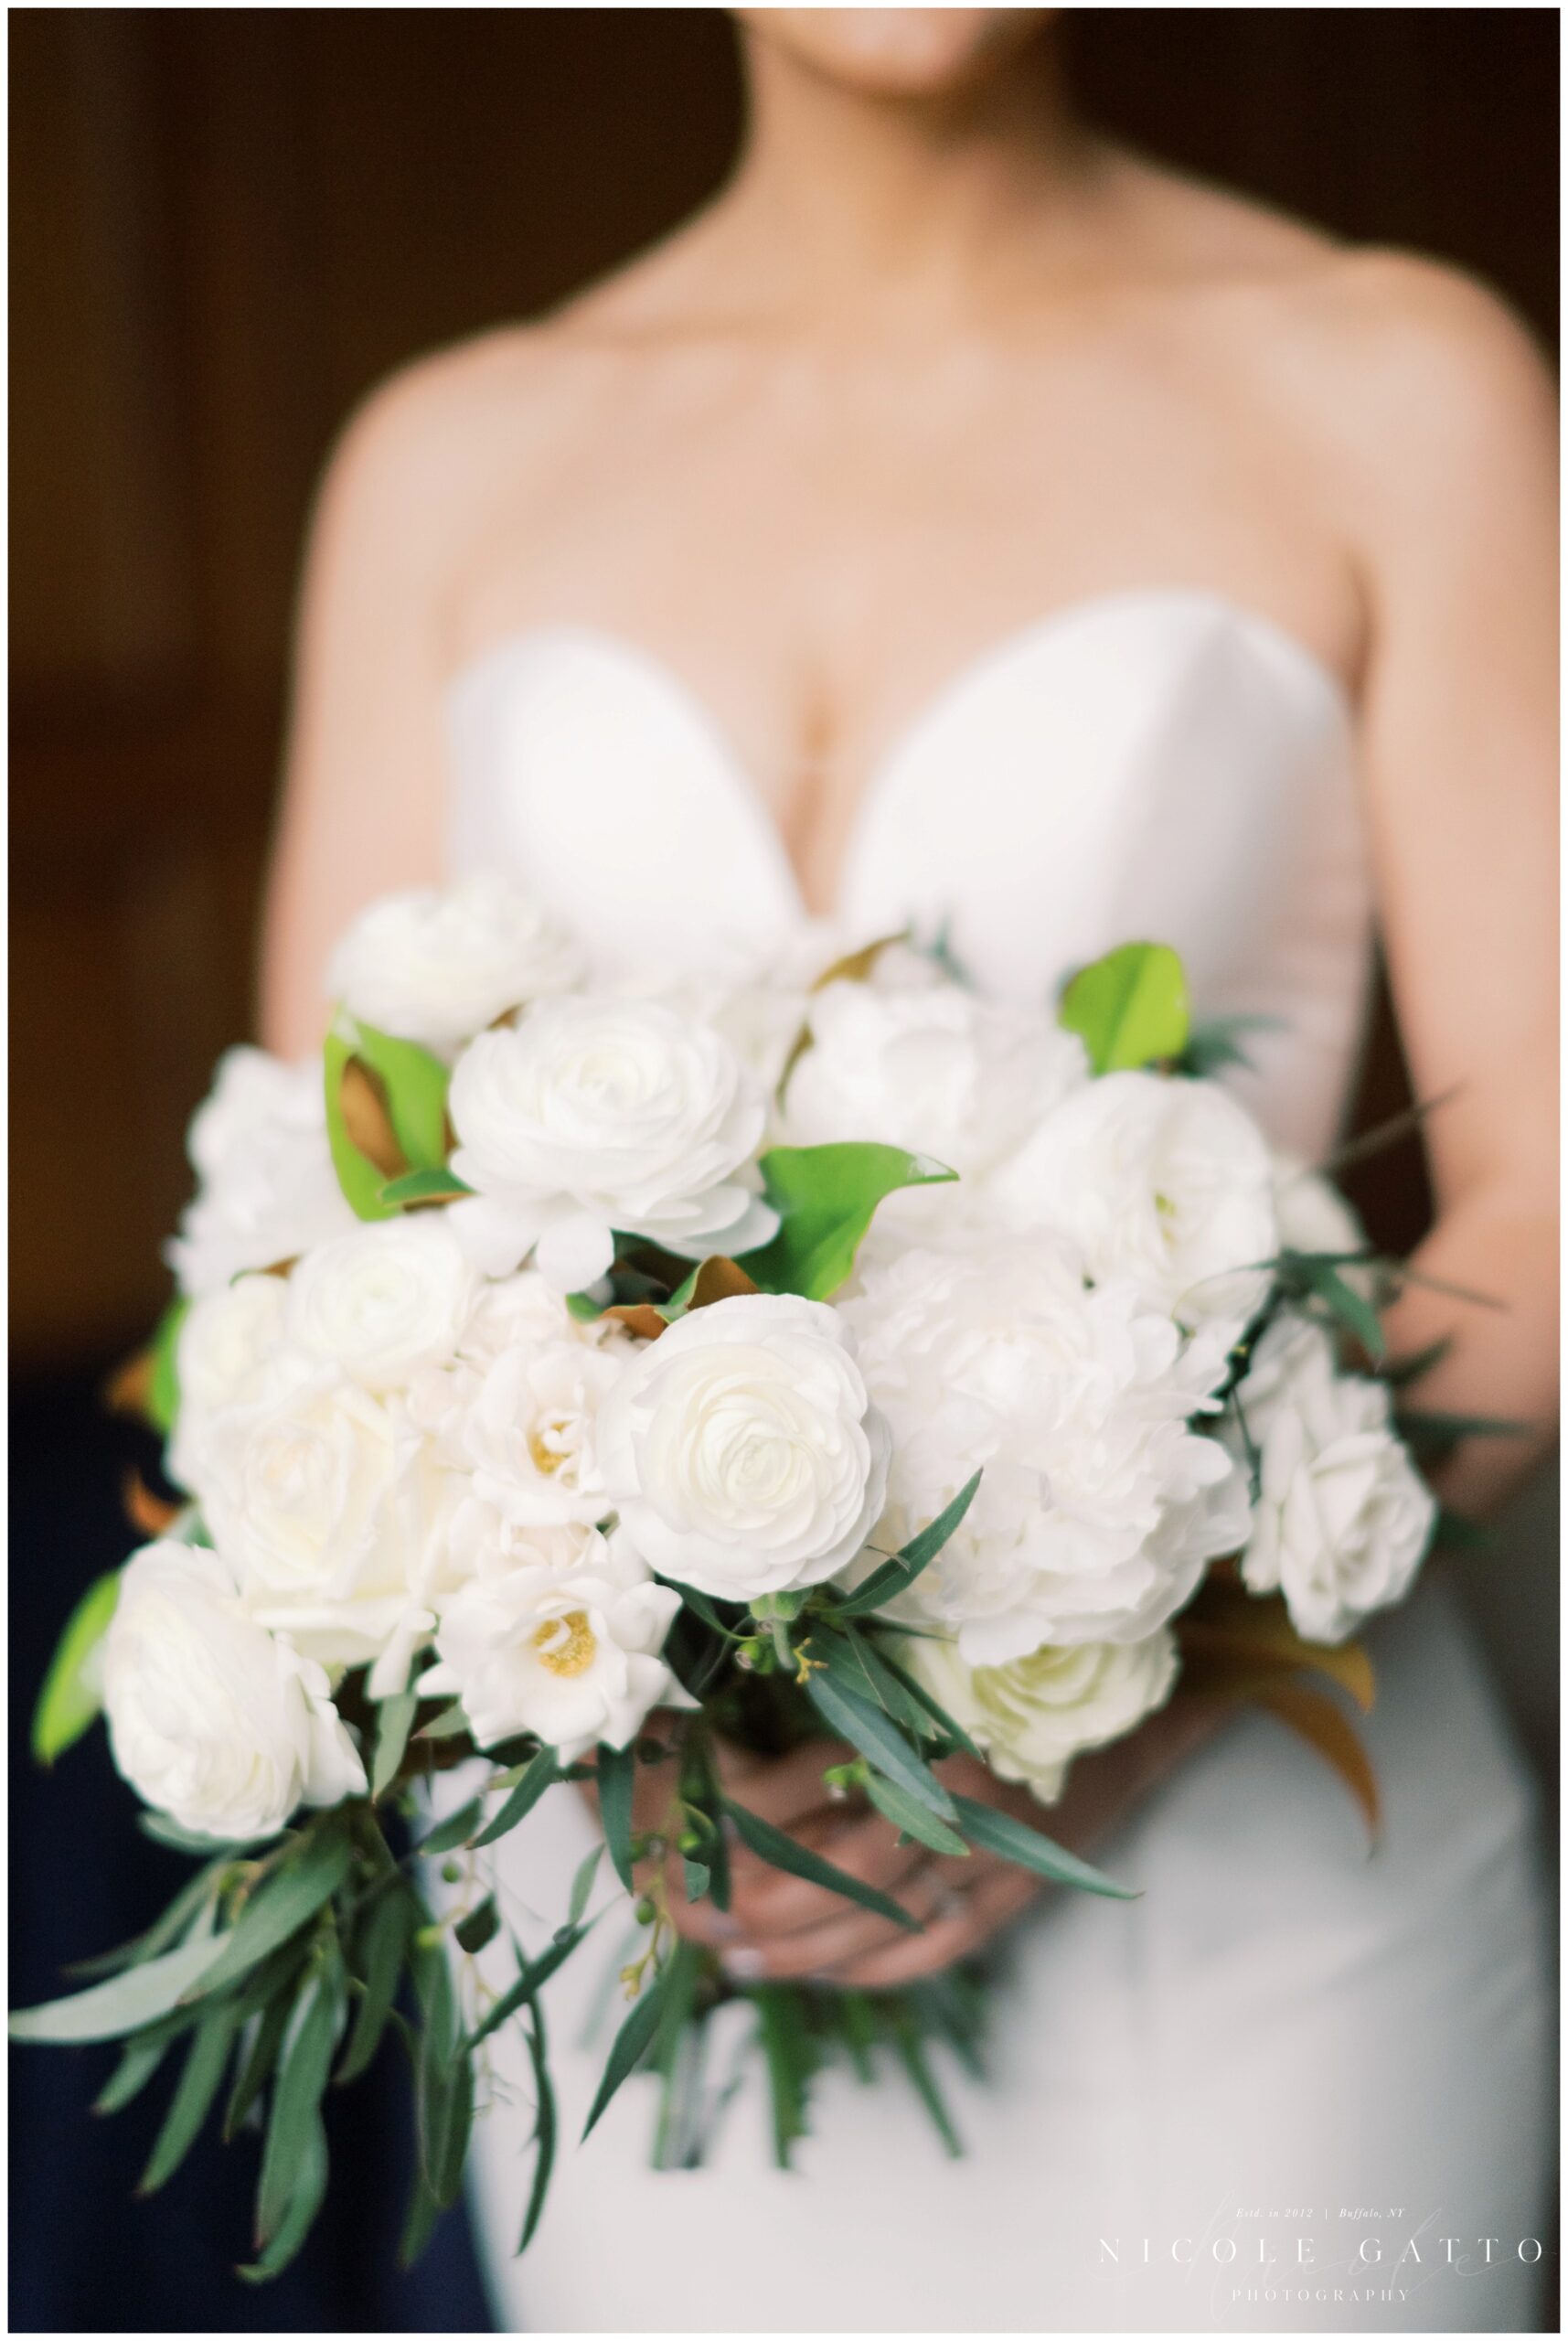 brides bouquet photographed by nicole gatto photography